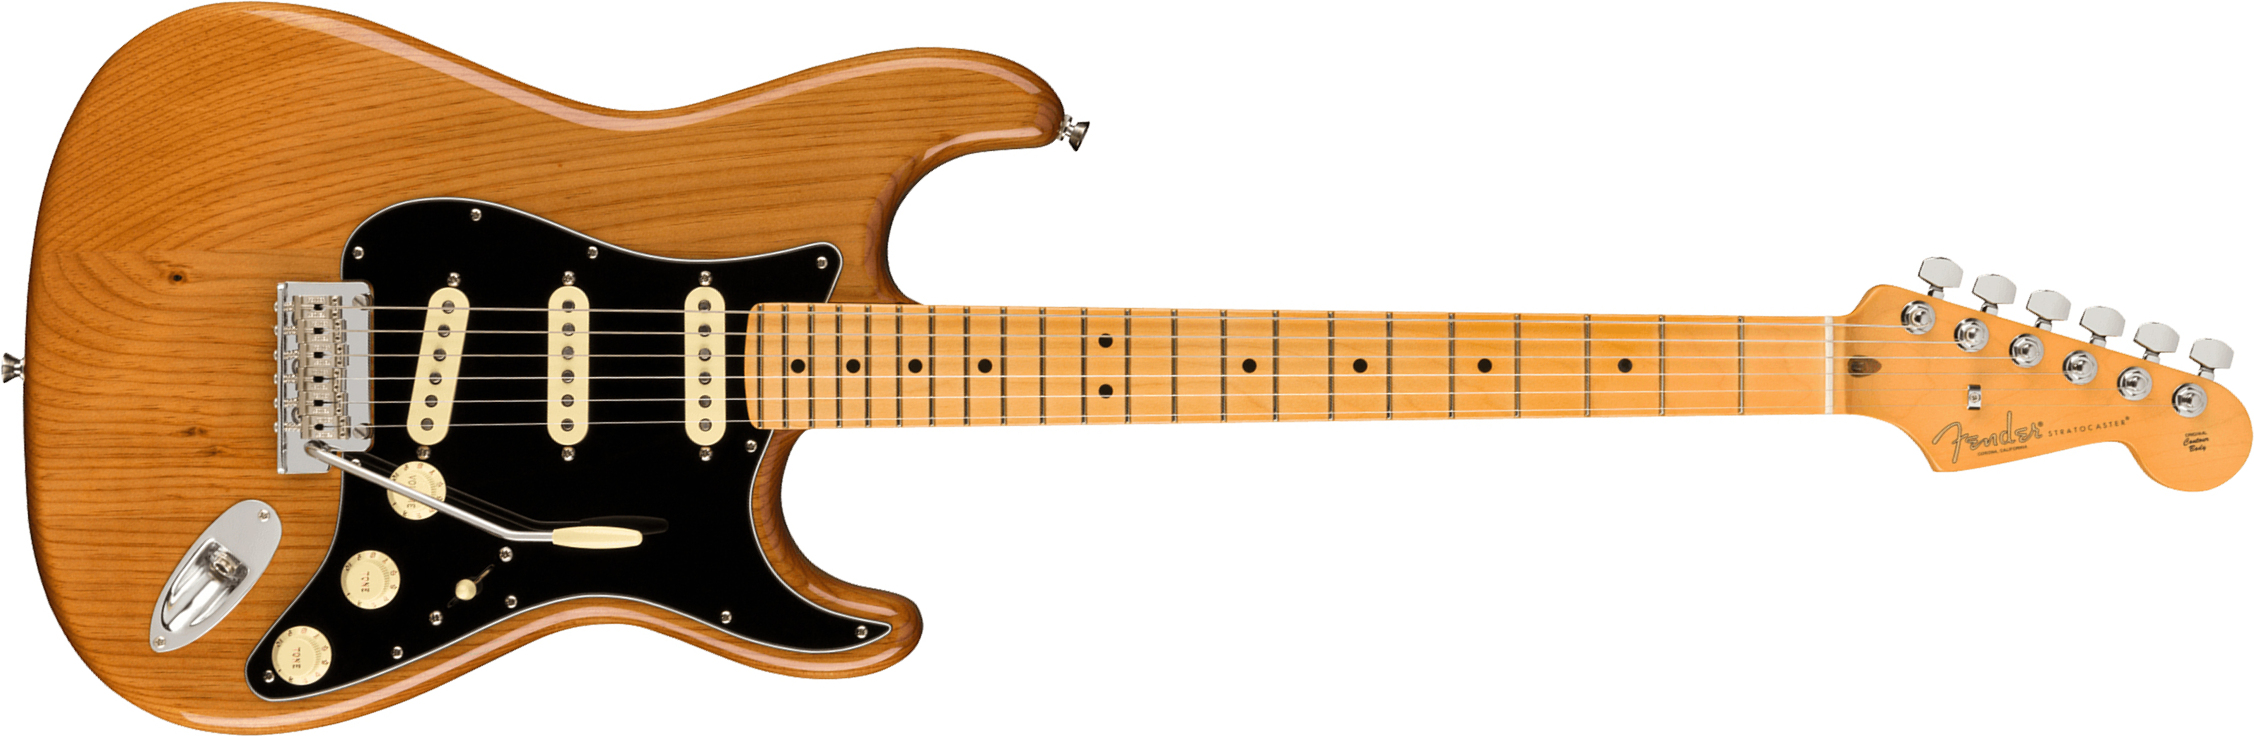 Fender Strat American Professional Ii Usa Mn - Roasted Pine - E-Gitarre in Str-Form - Main picture